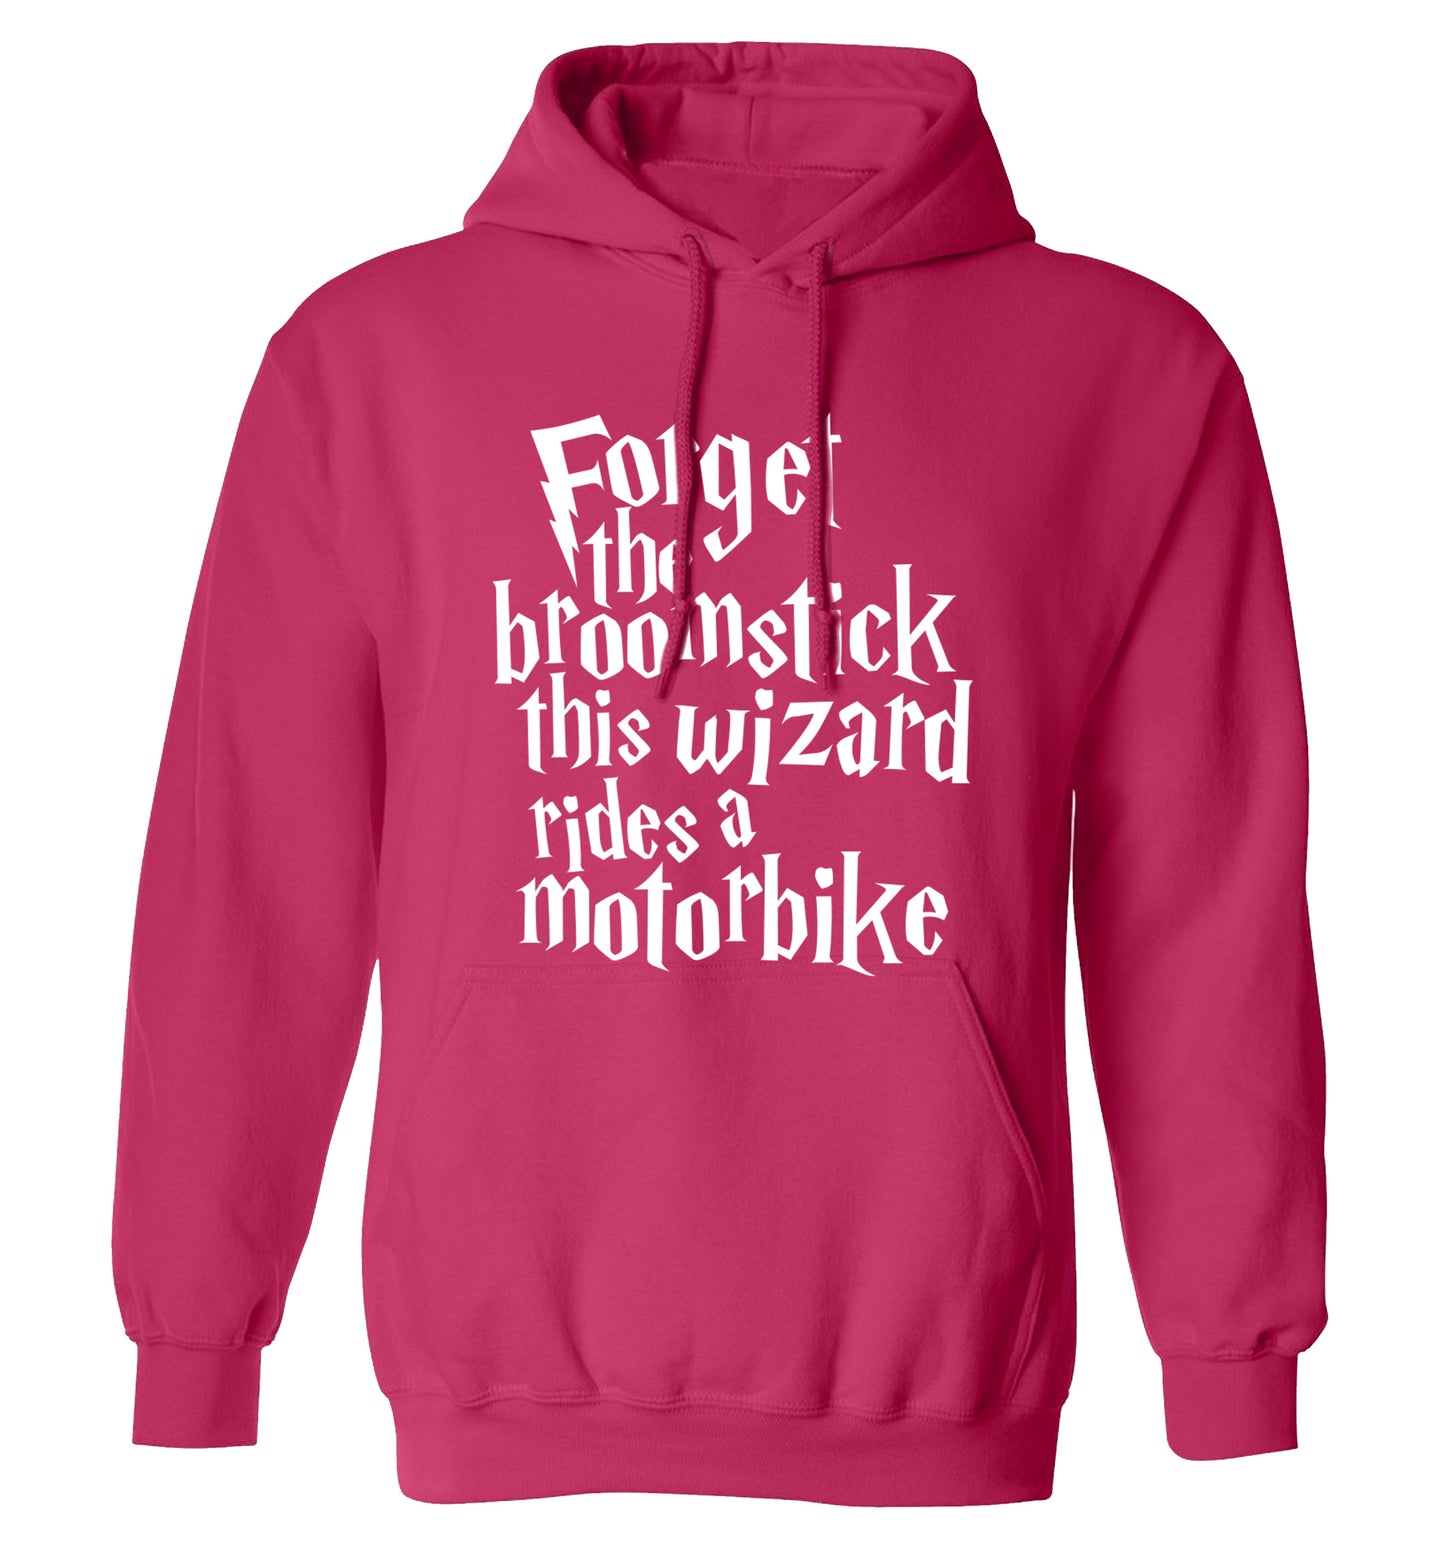 Forget the broomstick this wizard rides a motorbike adults unisexpink hoodie 2XL